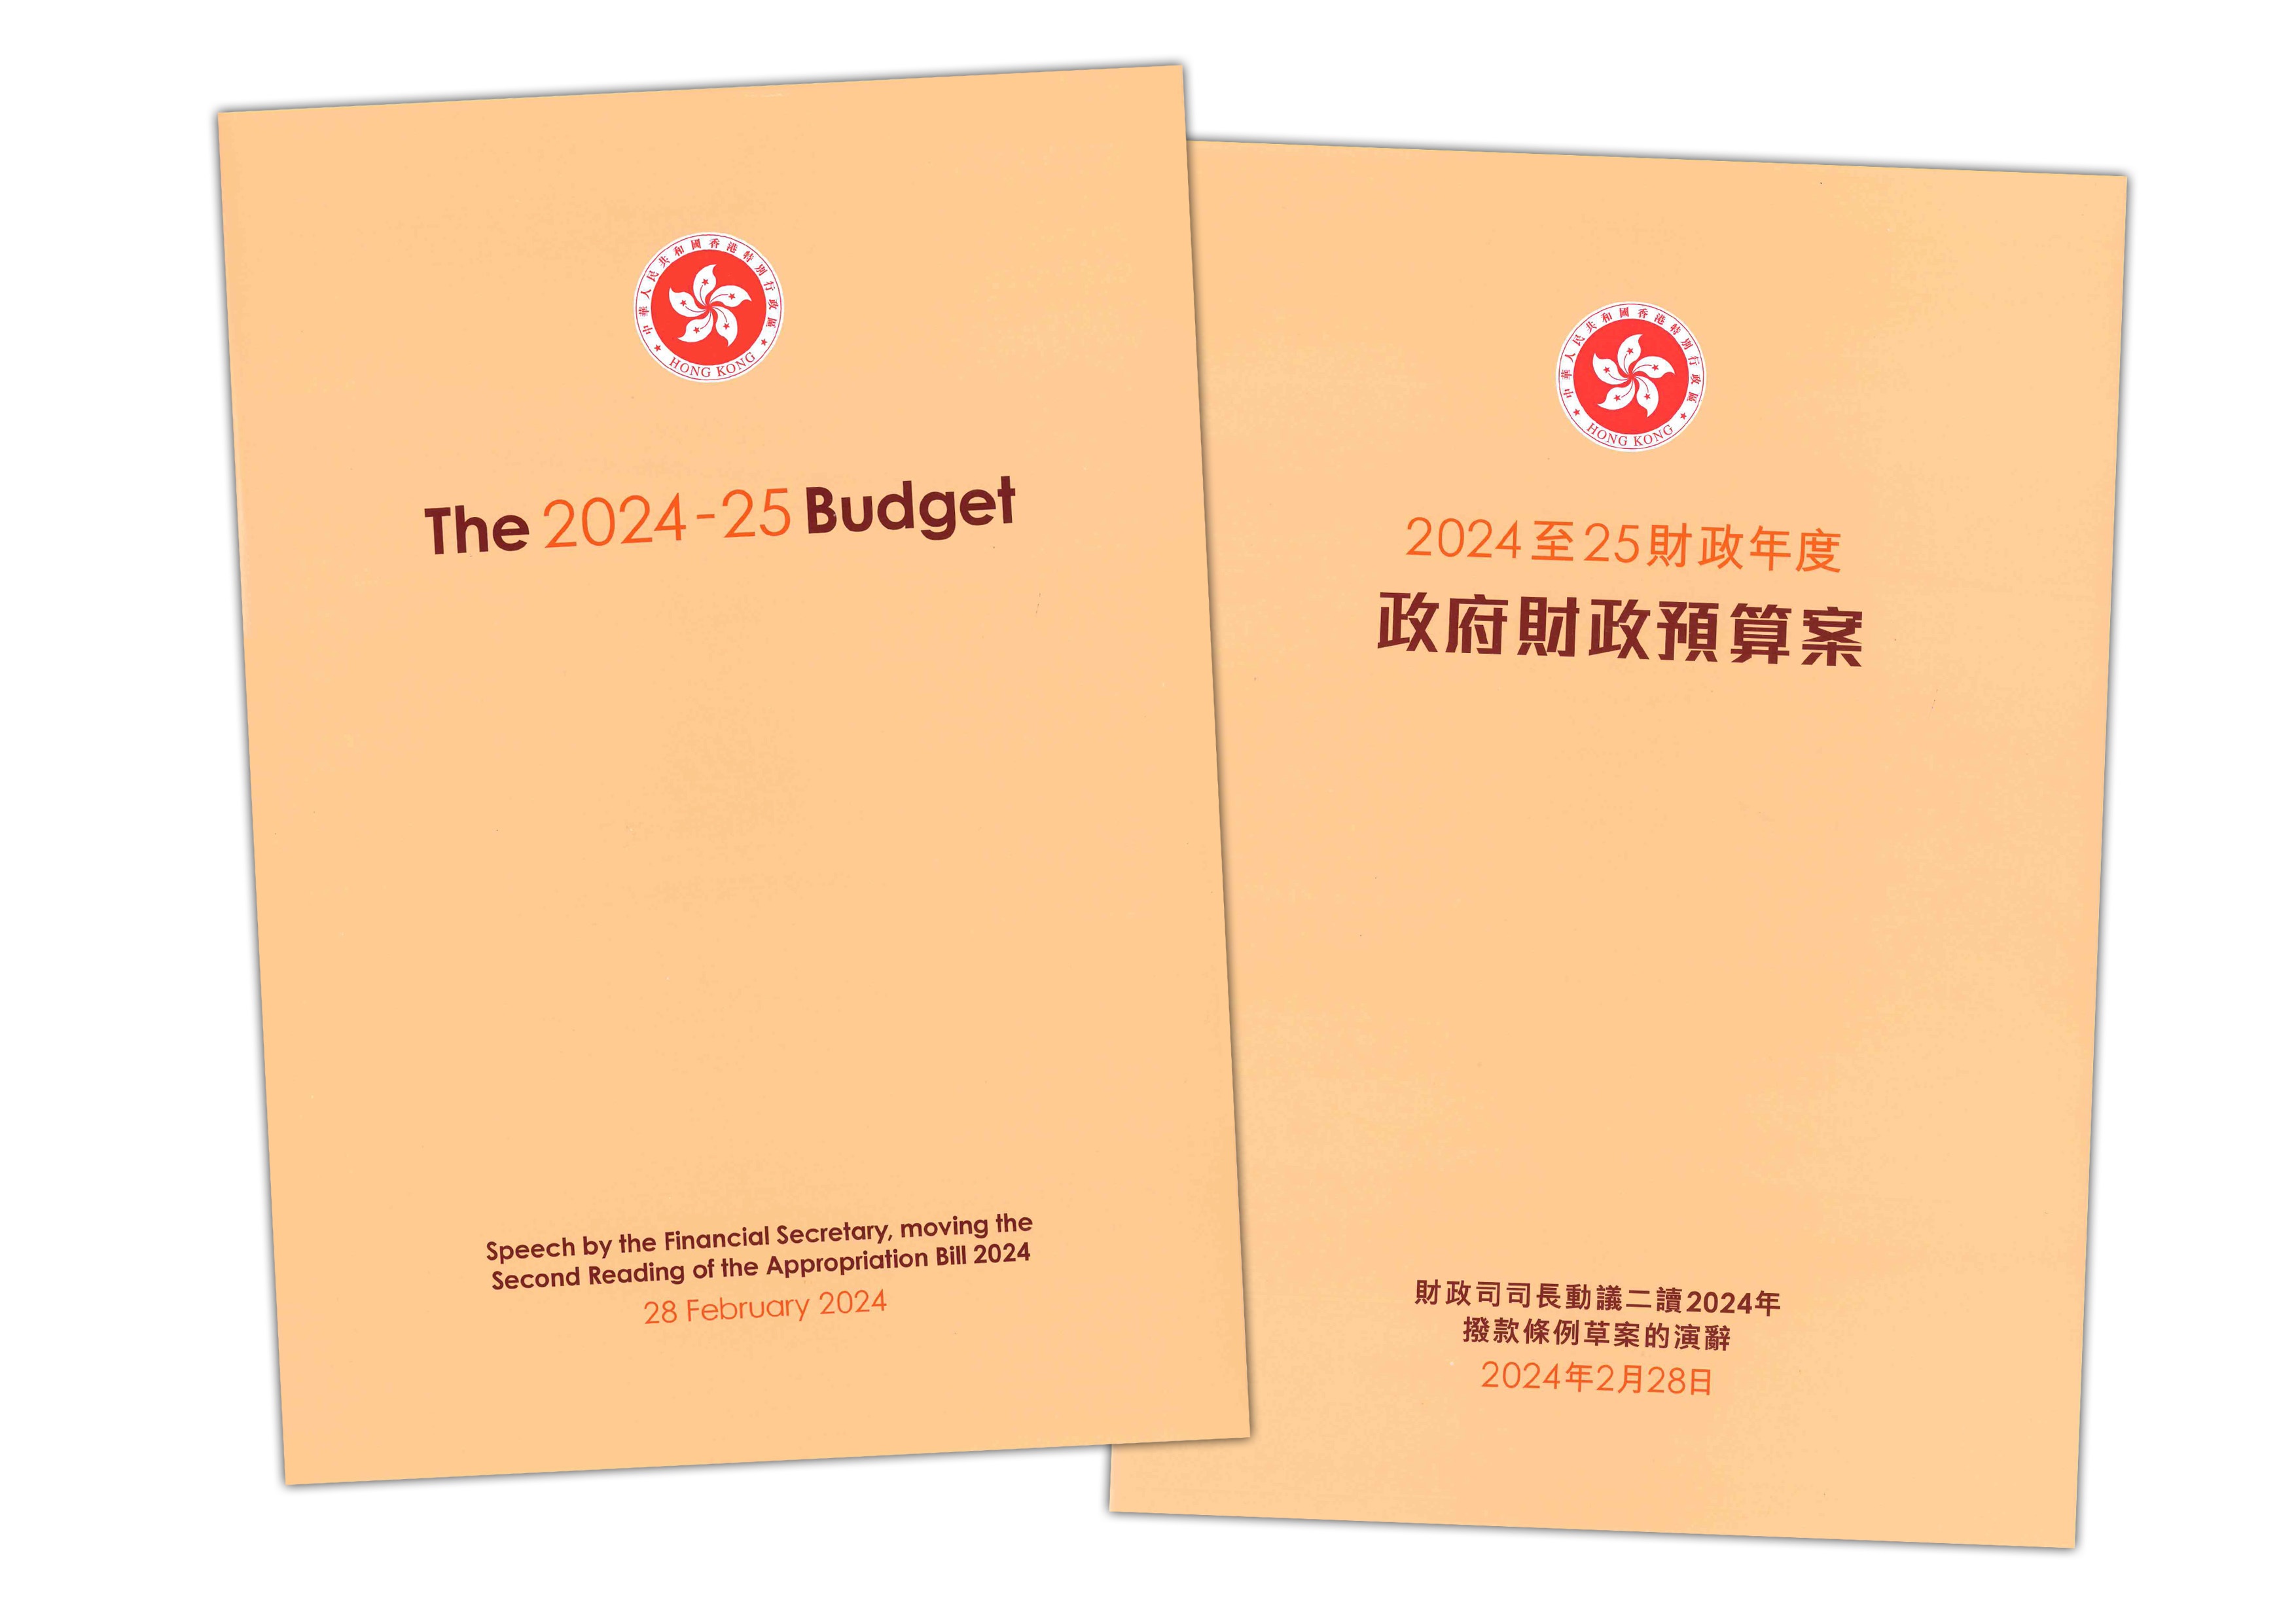 The 2024-25 Budget